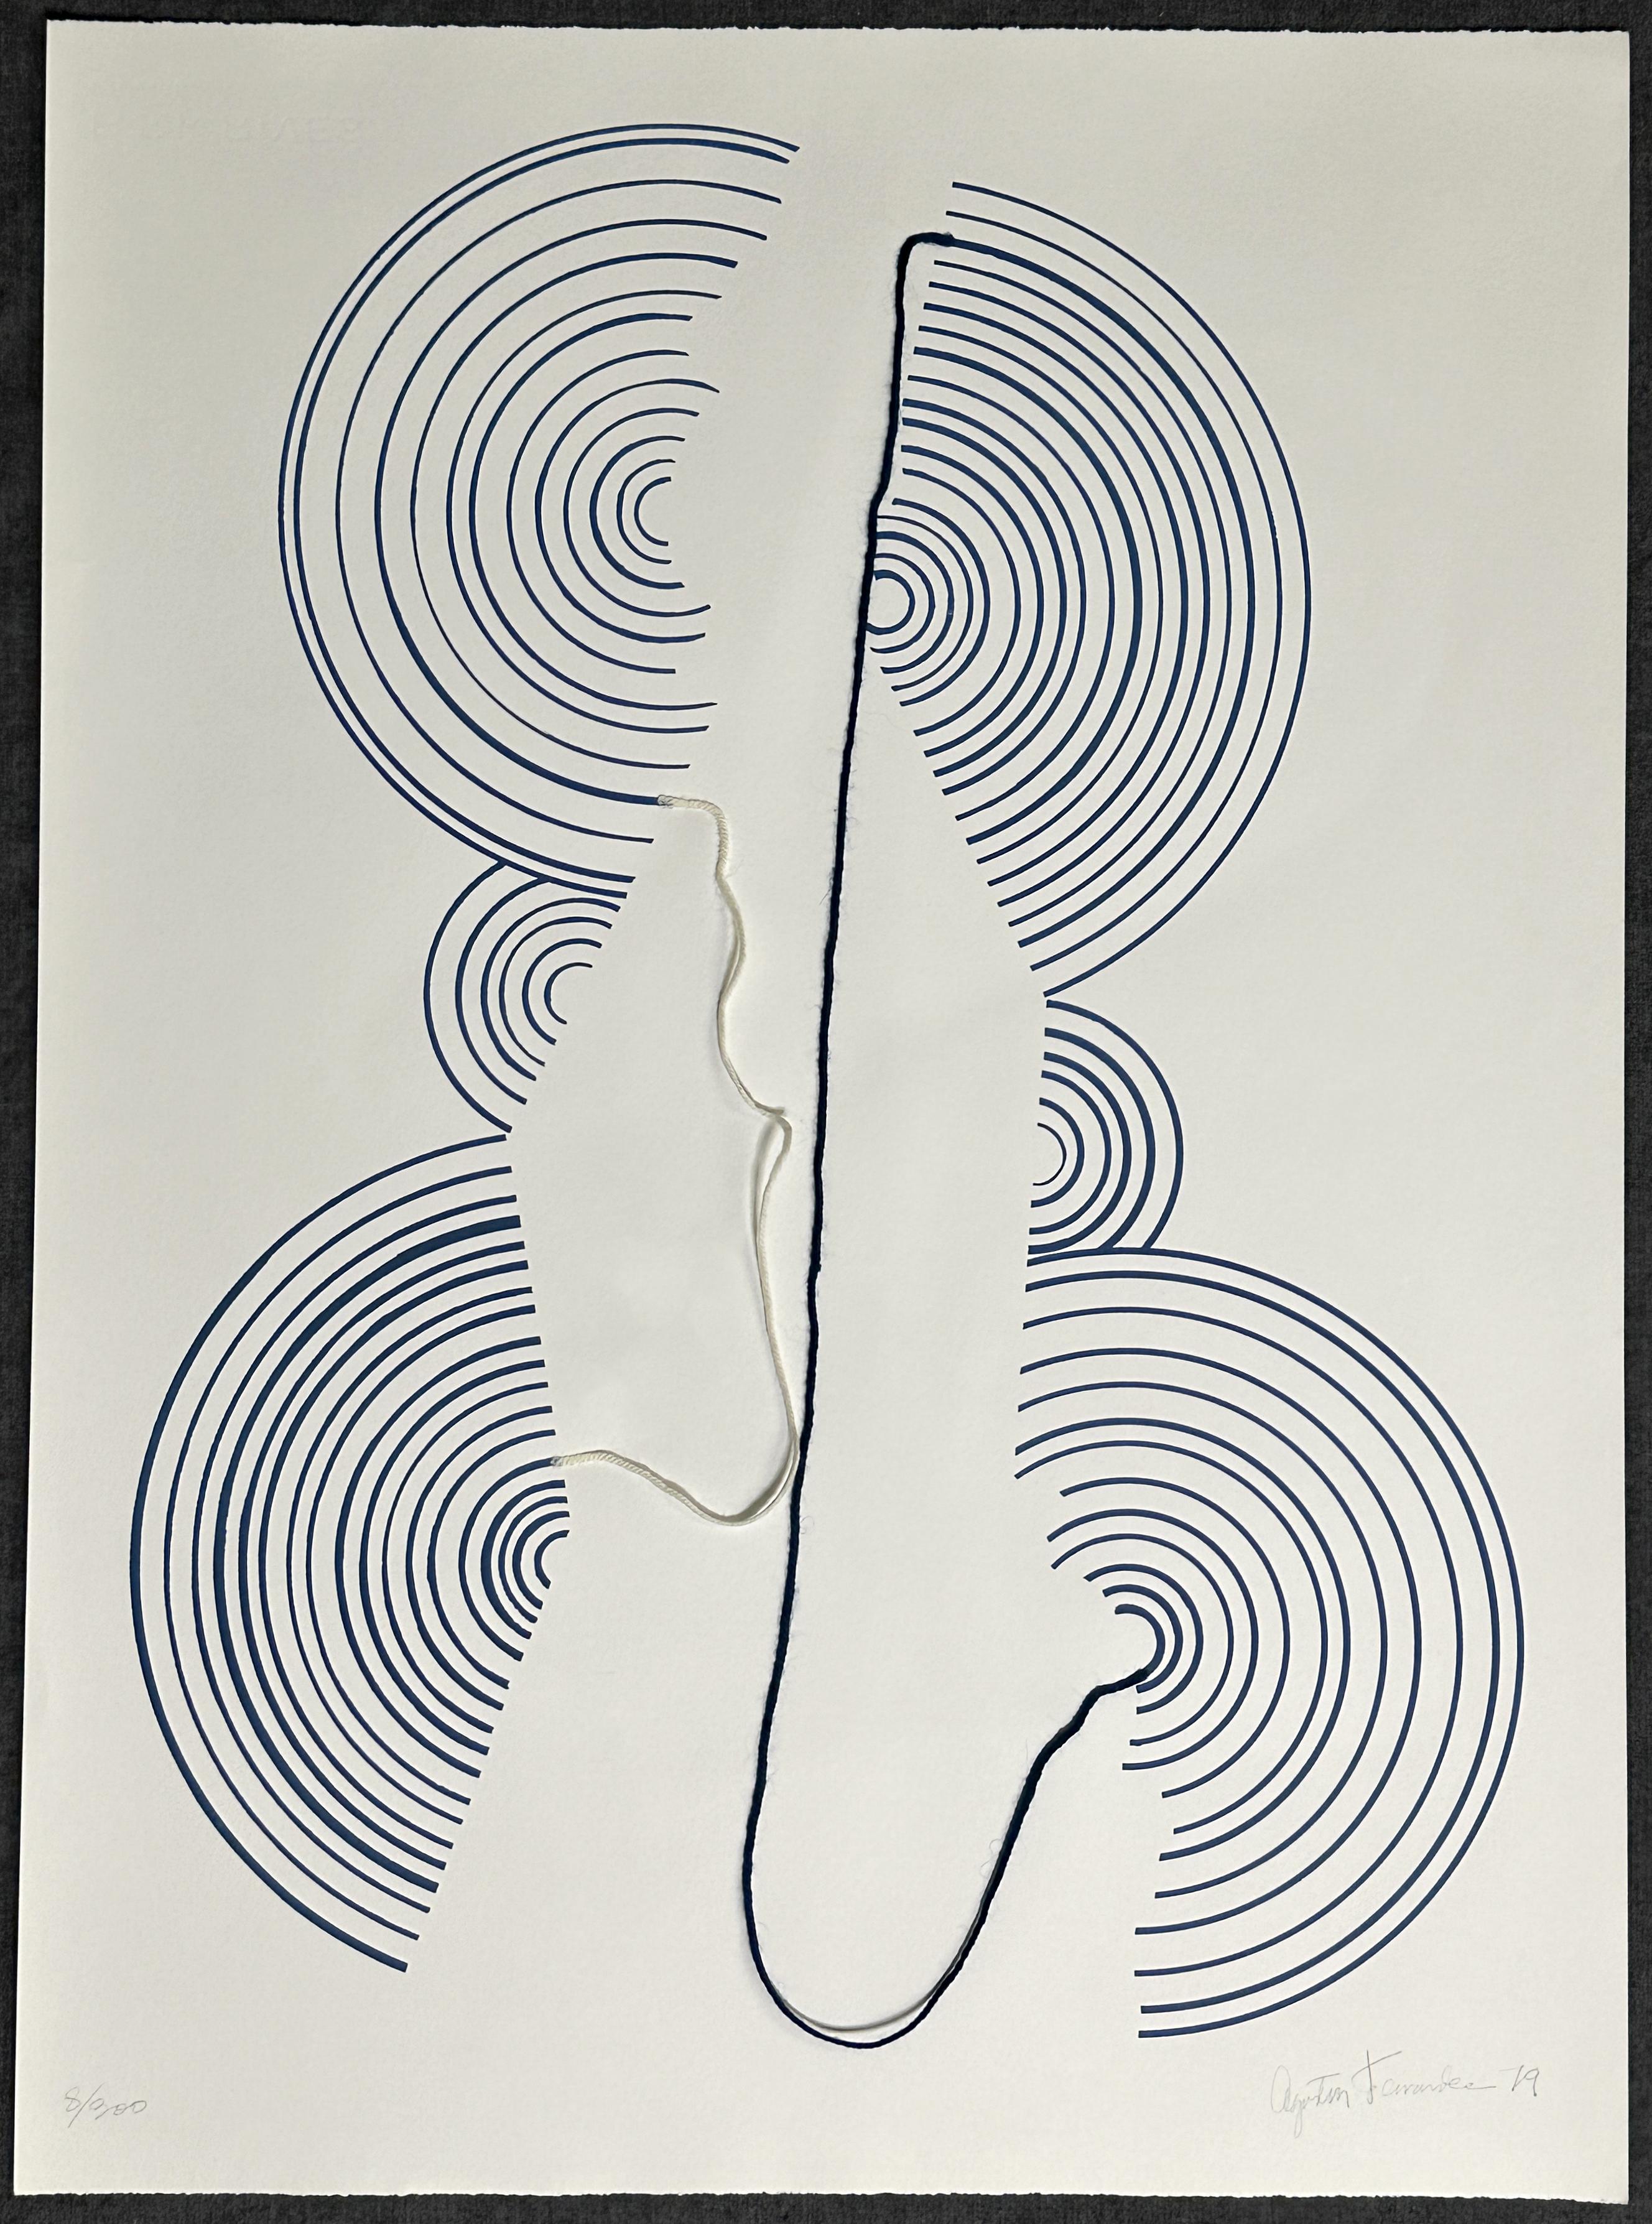 Midnight Blue 1979 Signed Limited Edition Lithograph - Print by Agustín Fernández